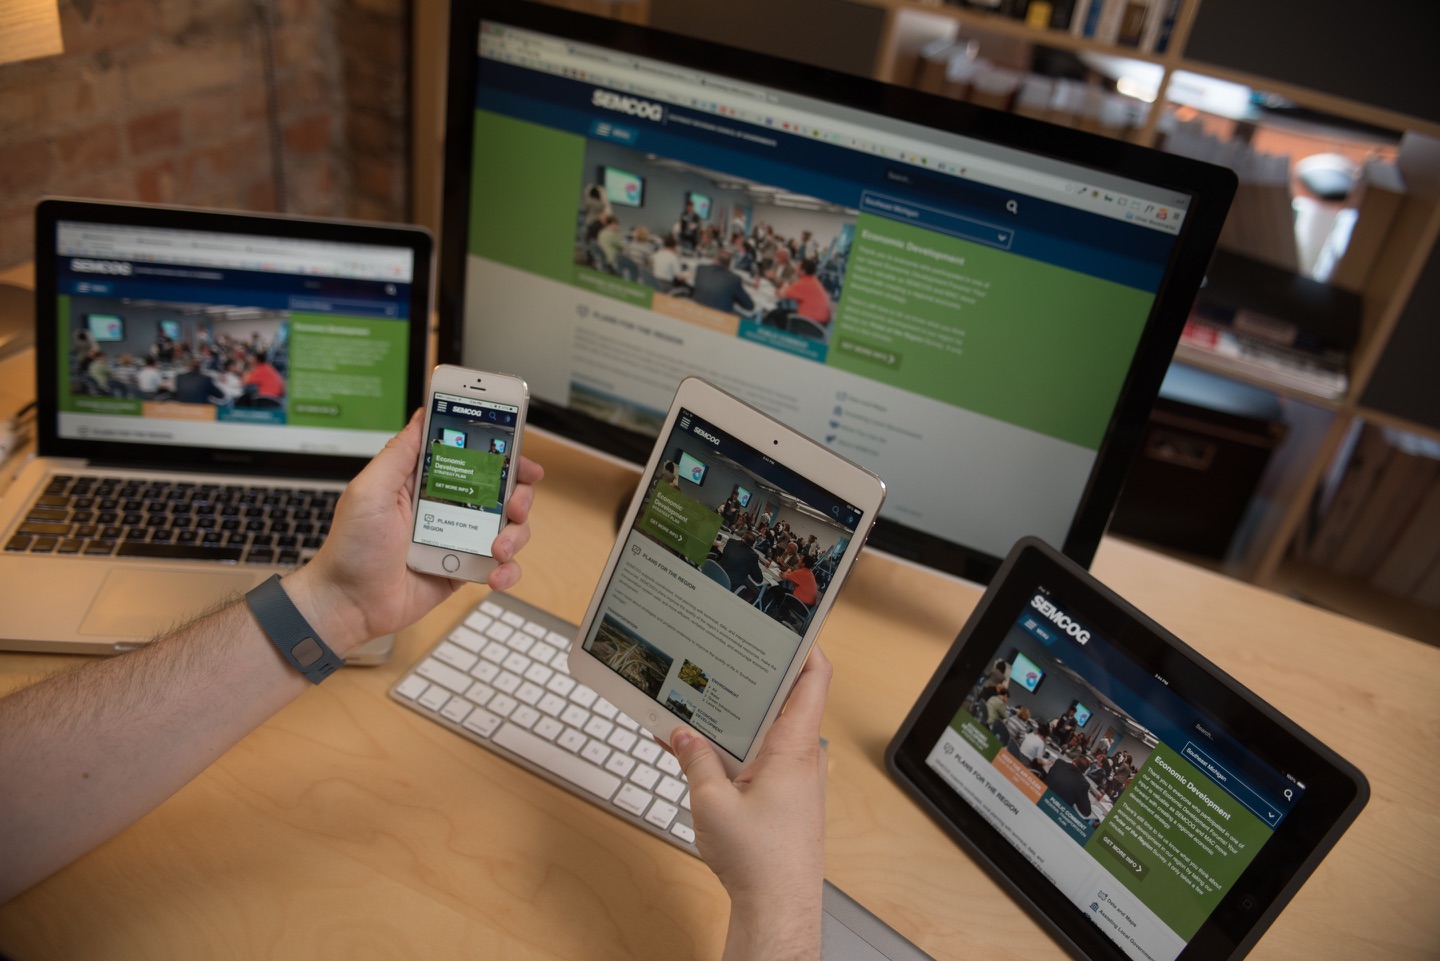 The SEMCOG website on multiple devices